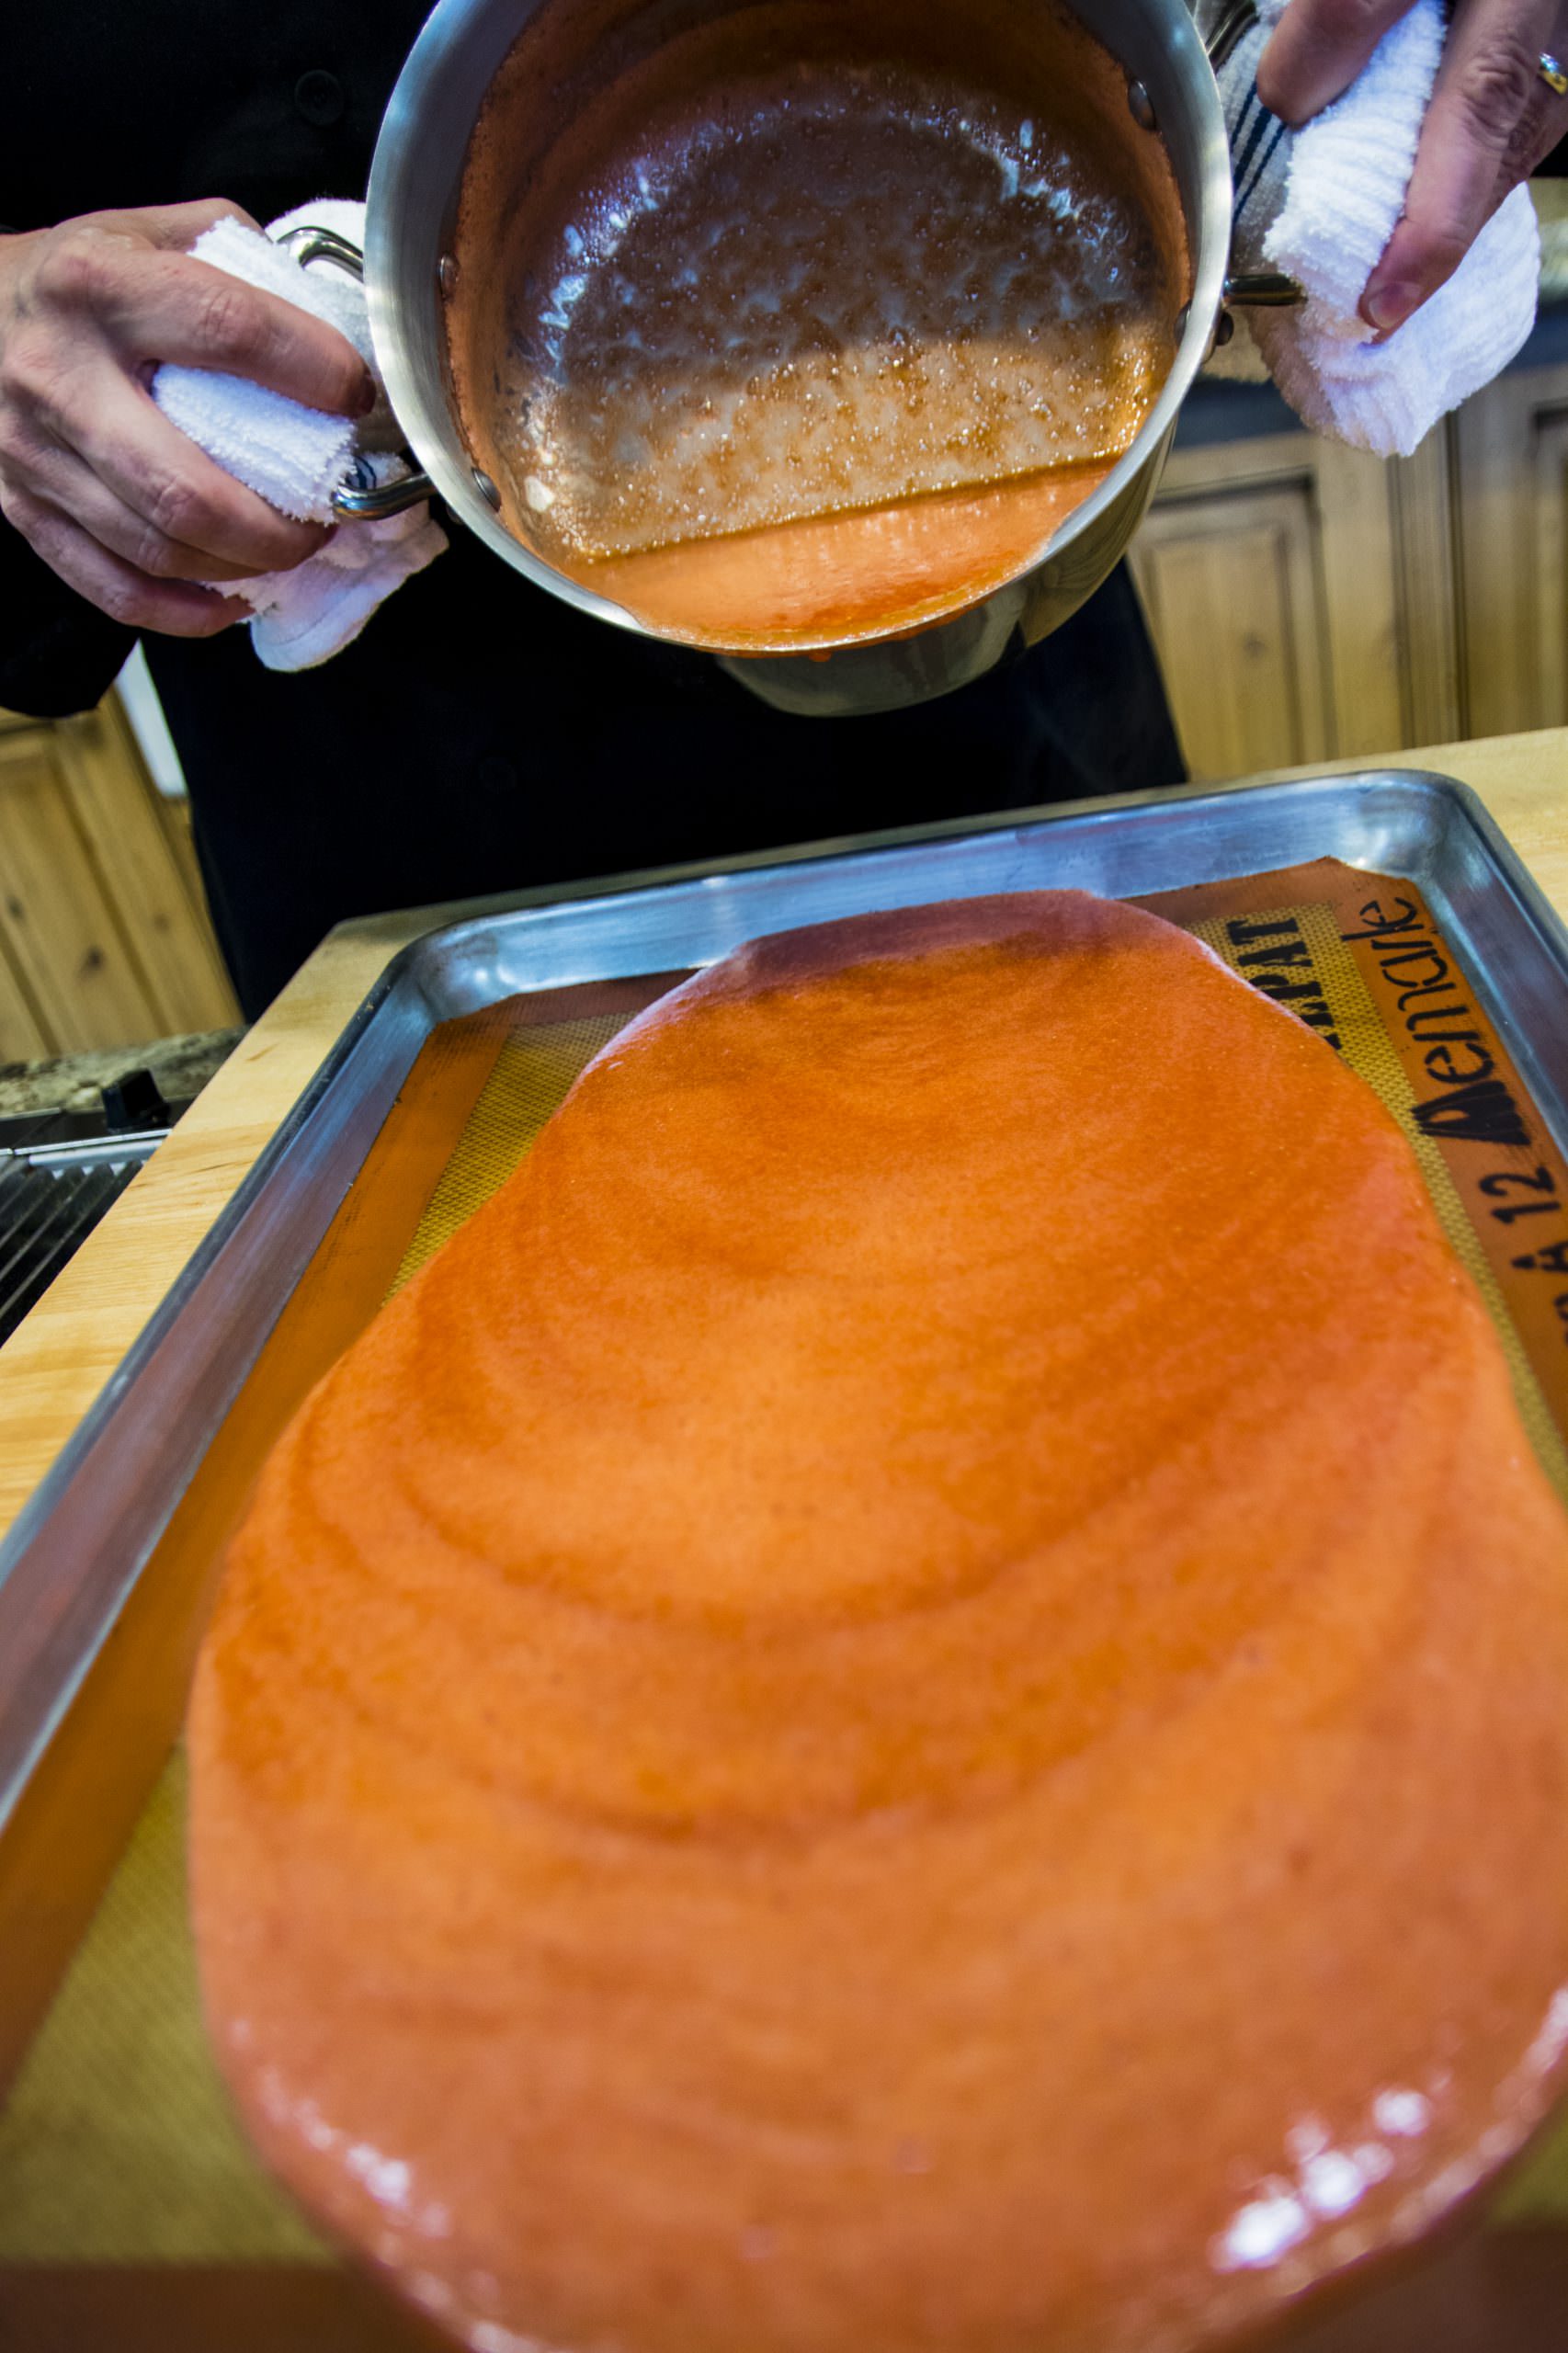 Fruit leather Pouring puree onto covered baking sheet to dry in oven03